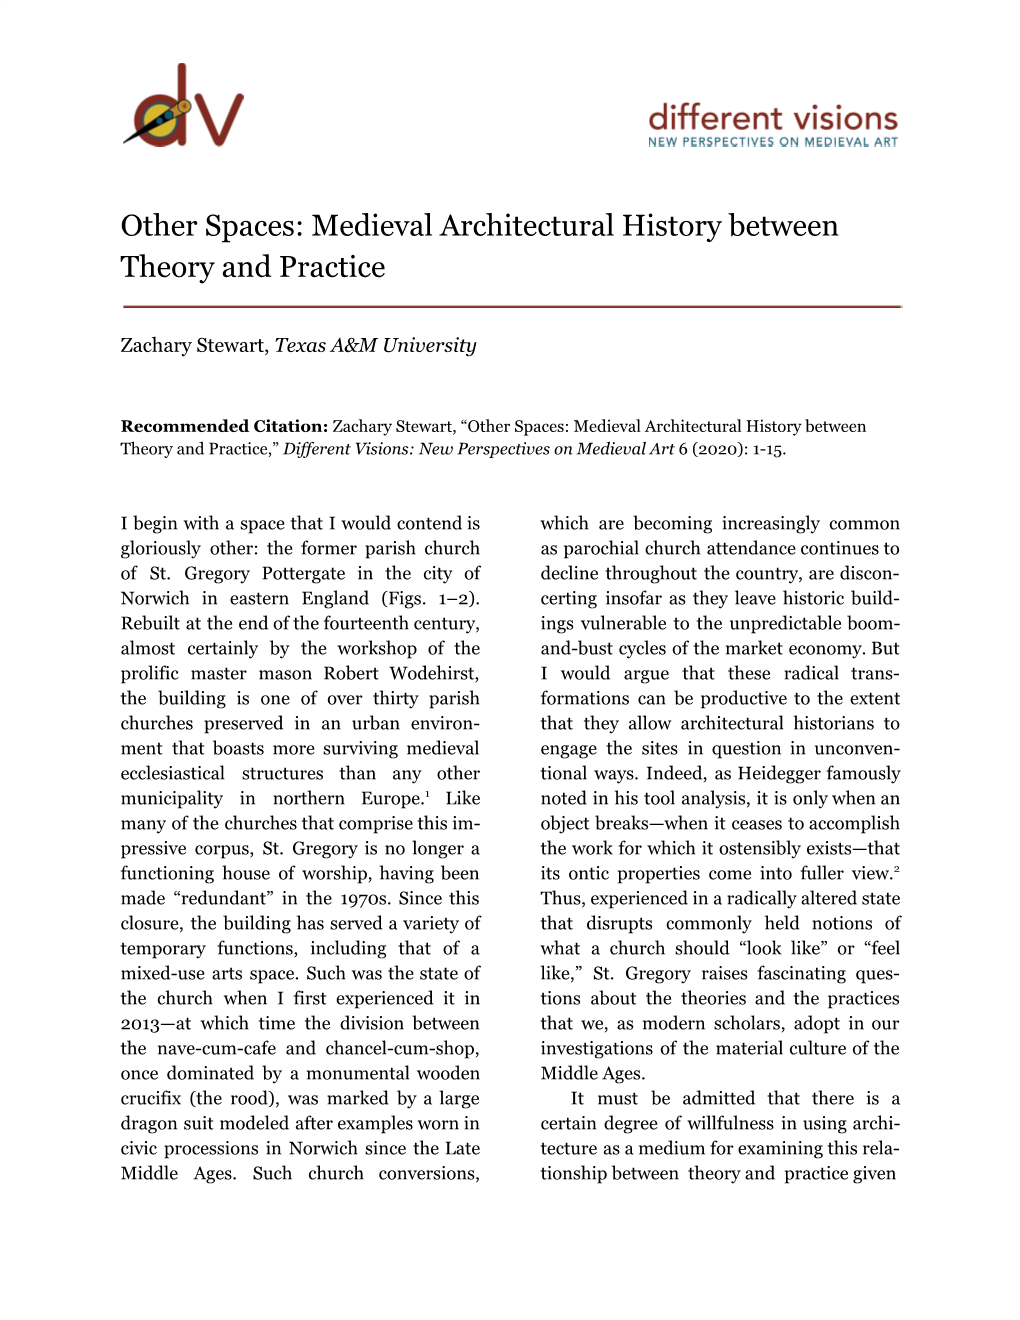 Other Spaces: Medieval Architectural History Between Theory and Practice